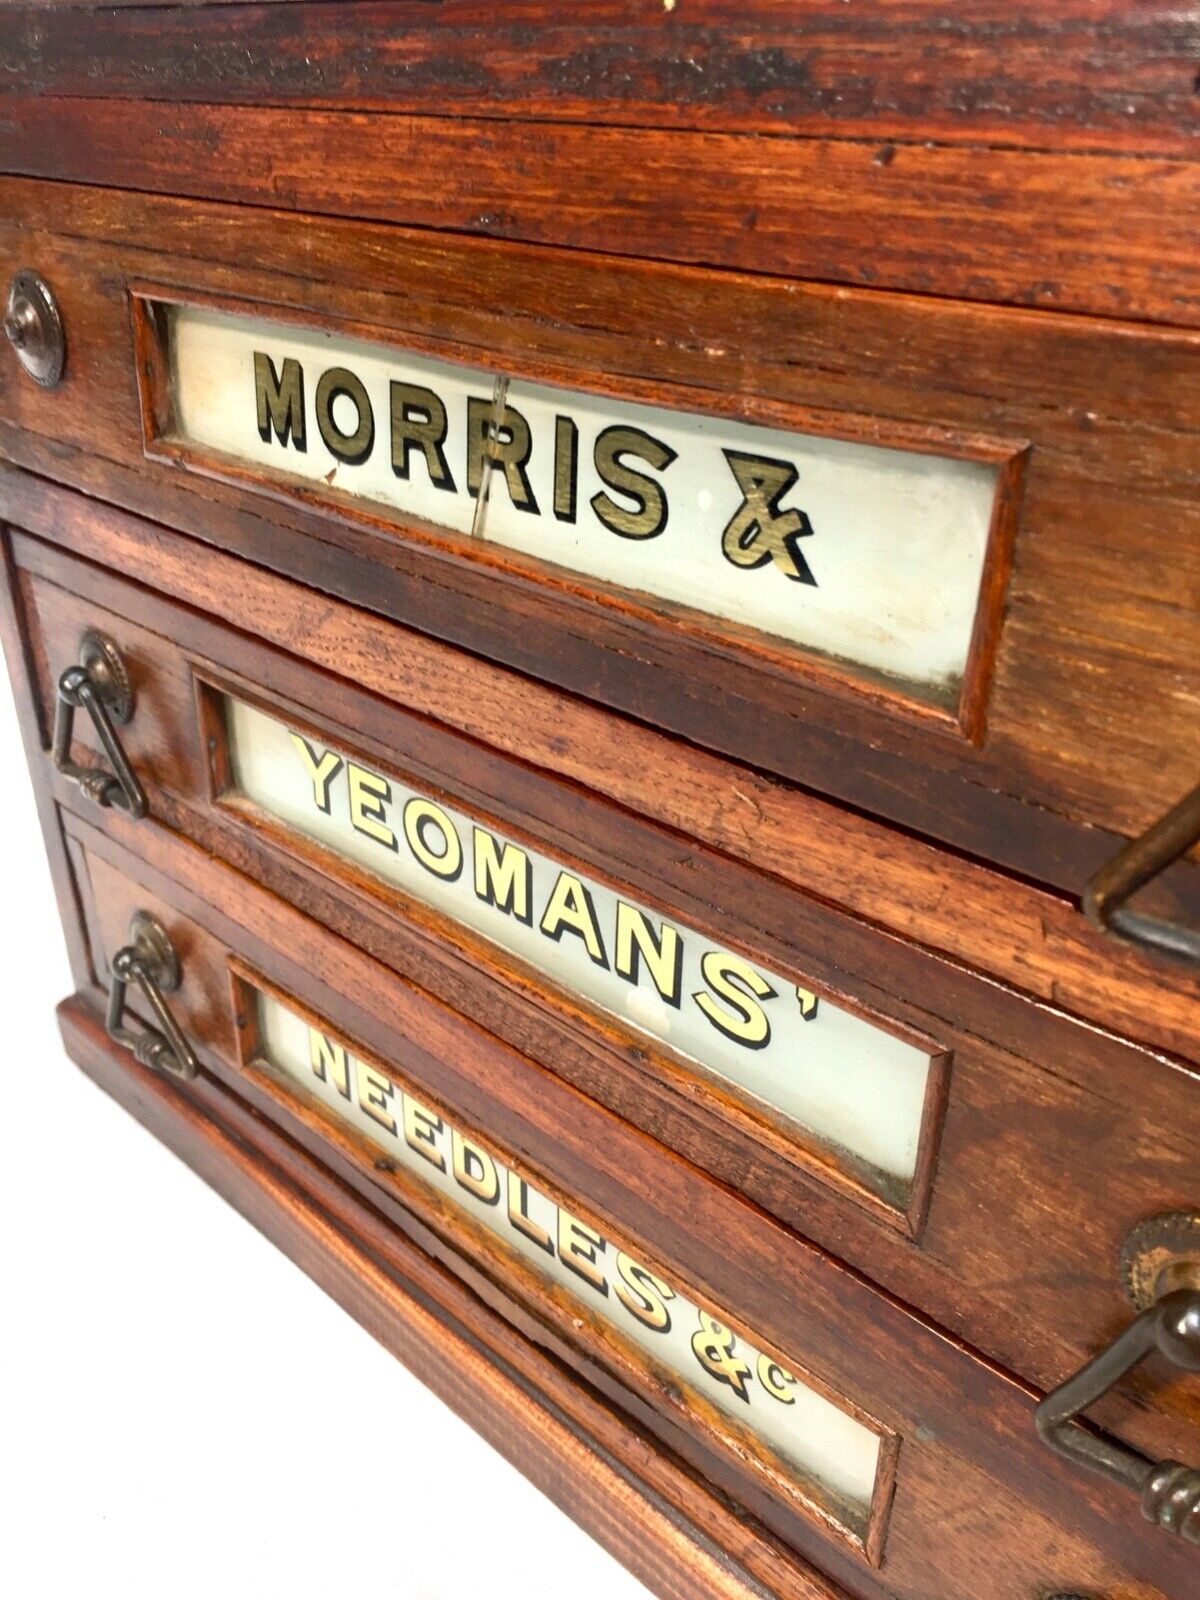 Antique Wooden & Glazed Shop Display Sewing Cabinet for Morris & Yeomans Needles